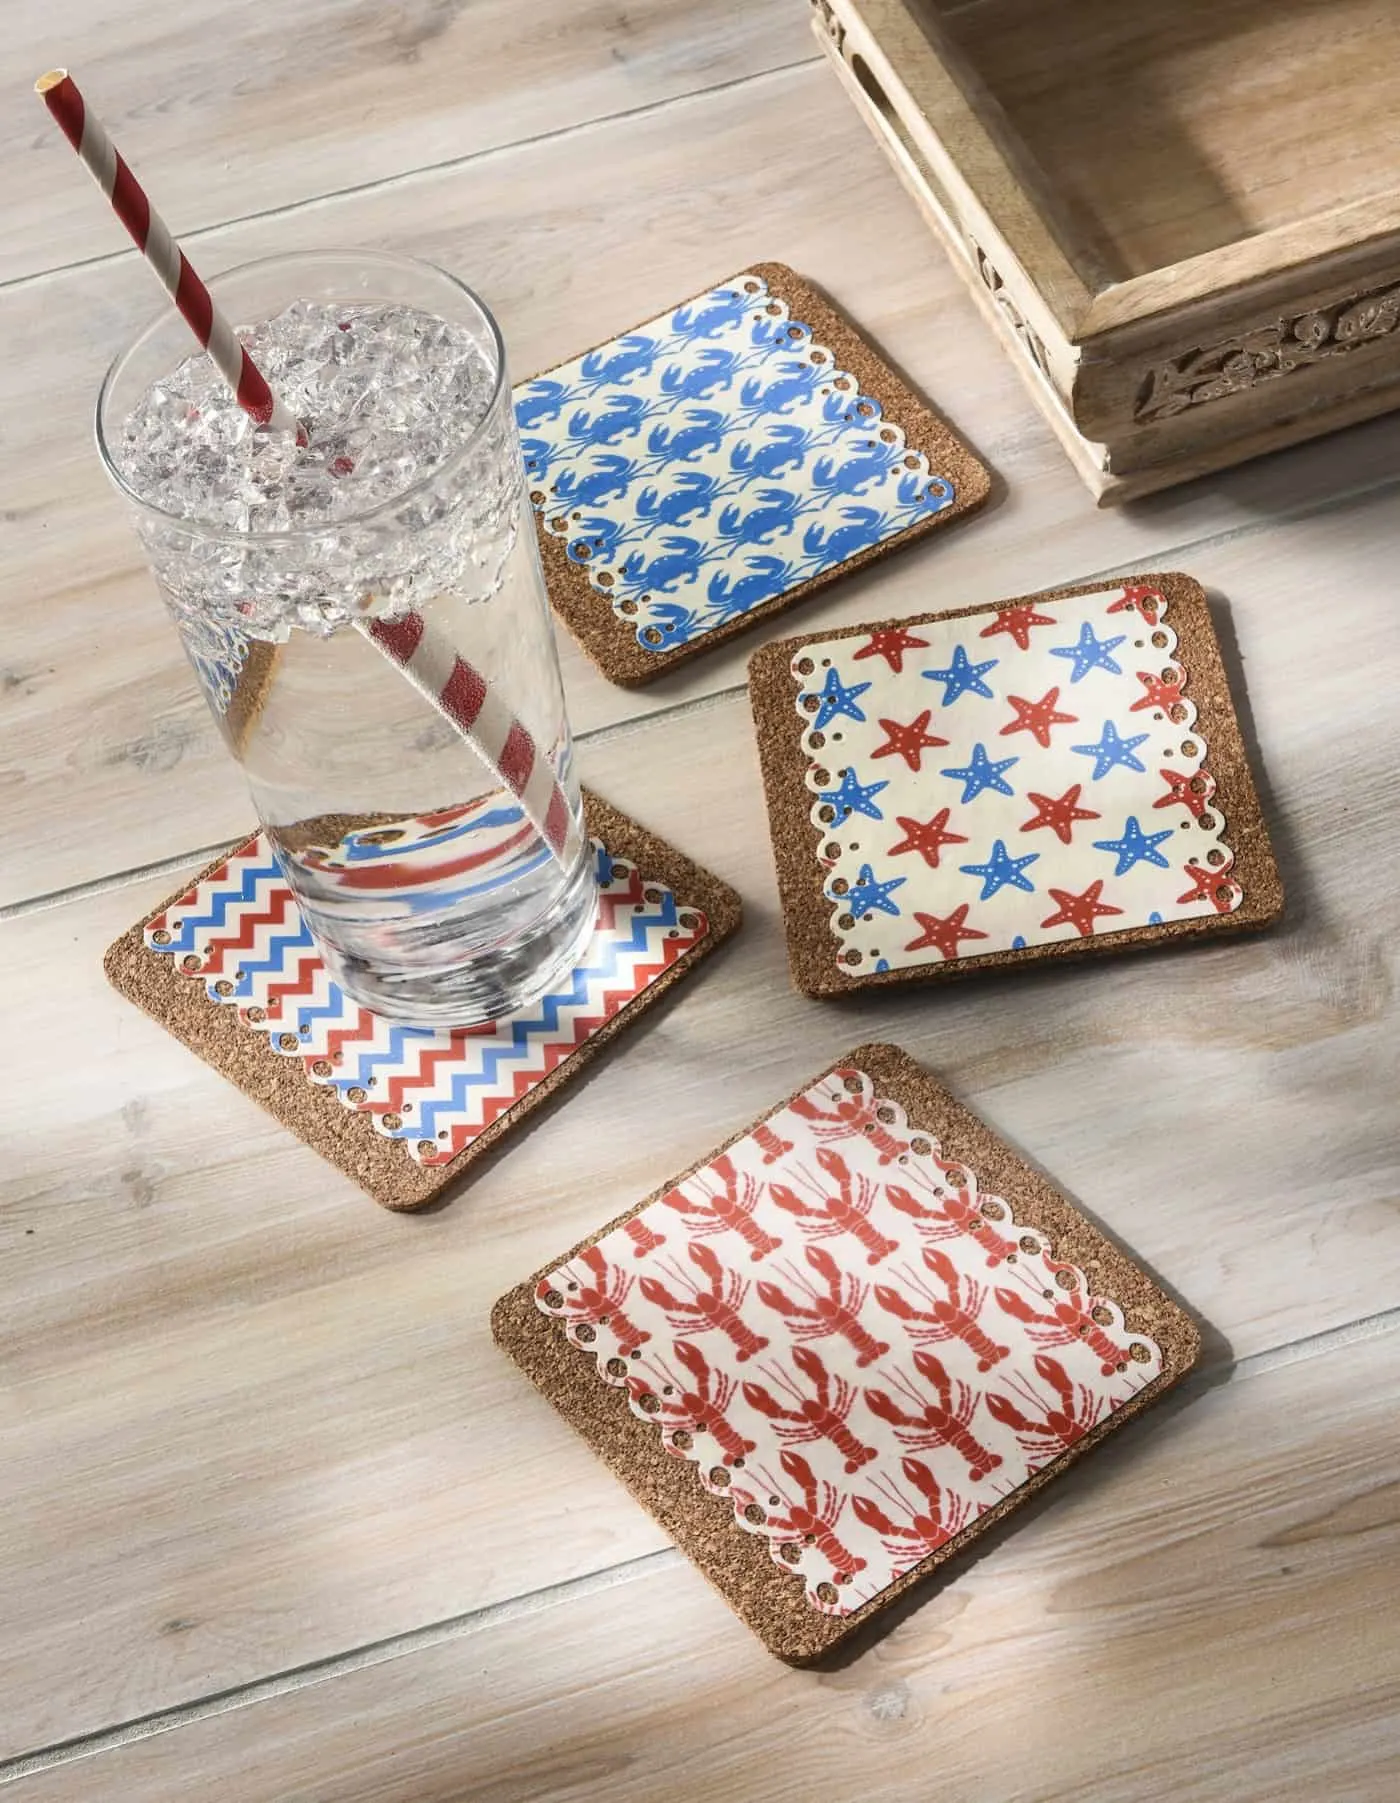 These Decoupage Coasters are Really Unique!